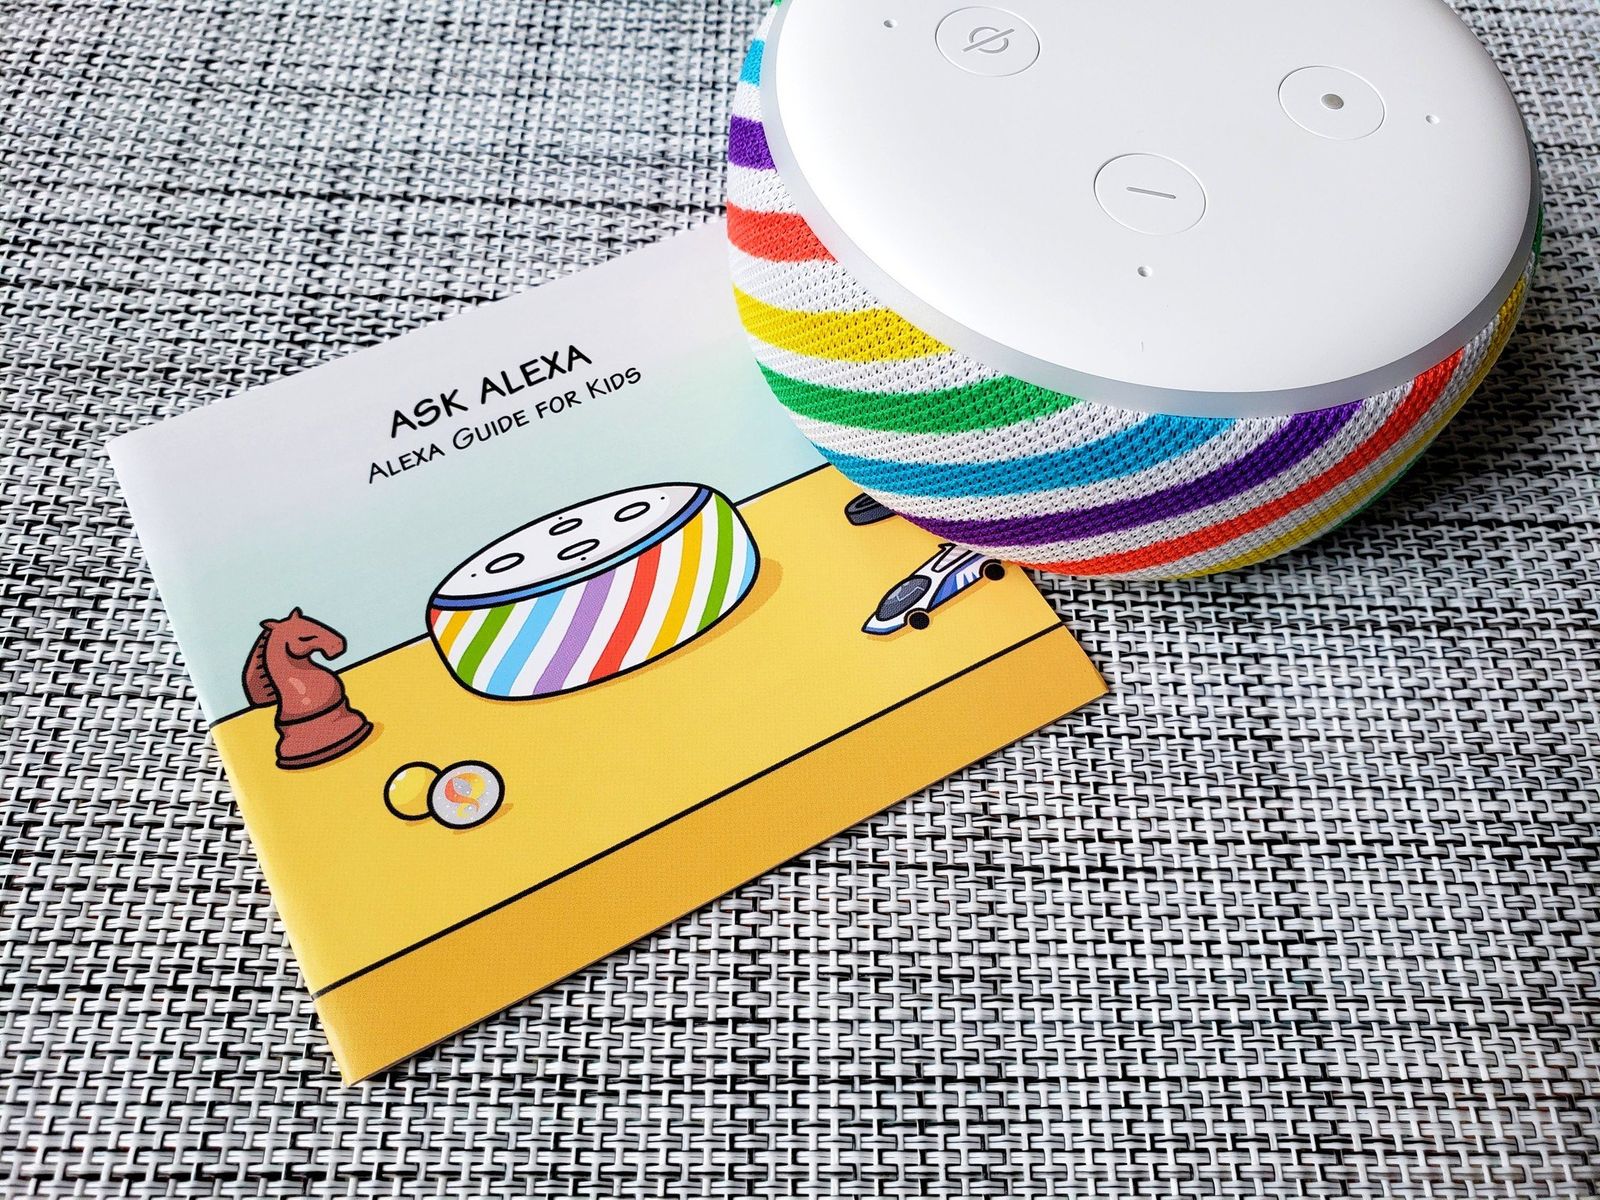 alexa games for toddlers